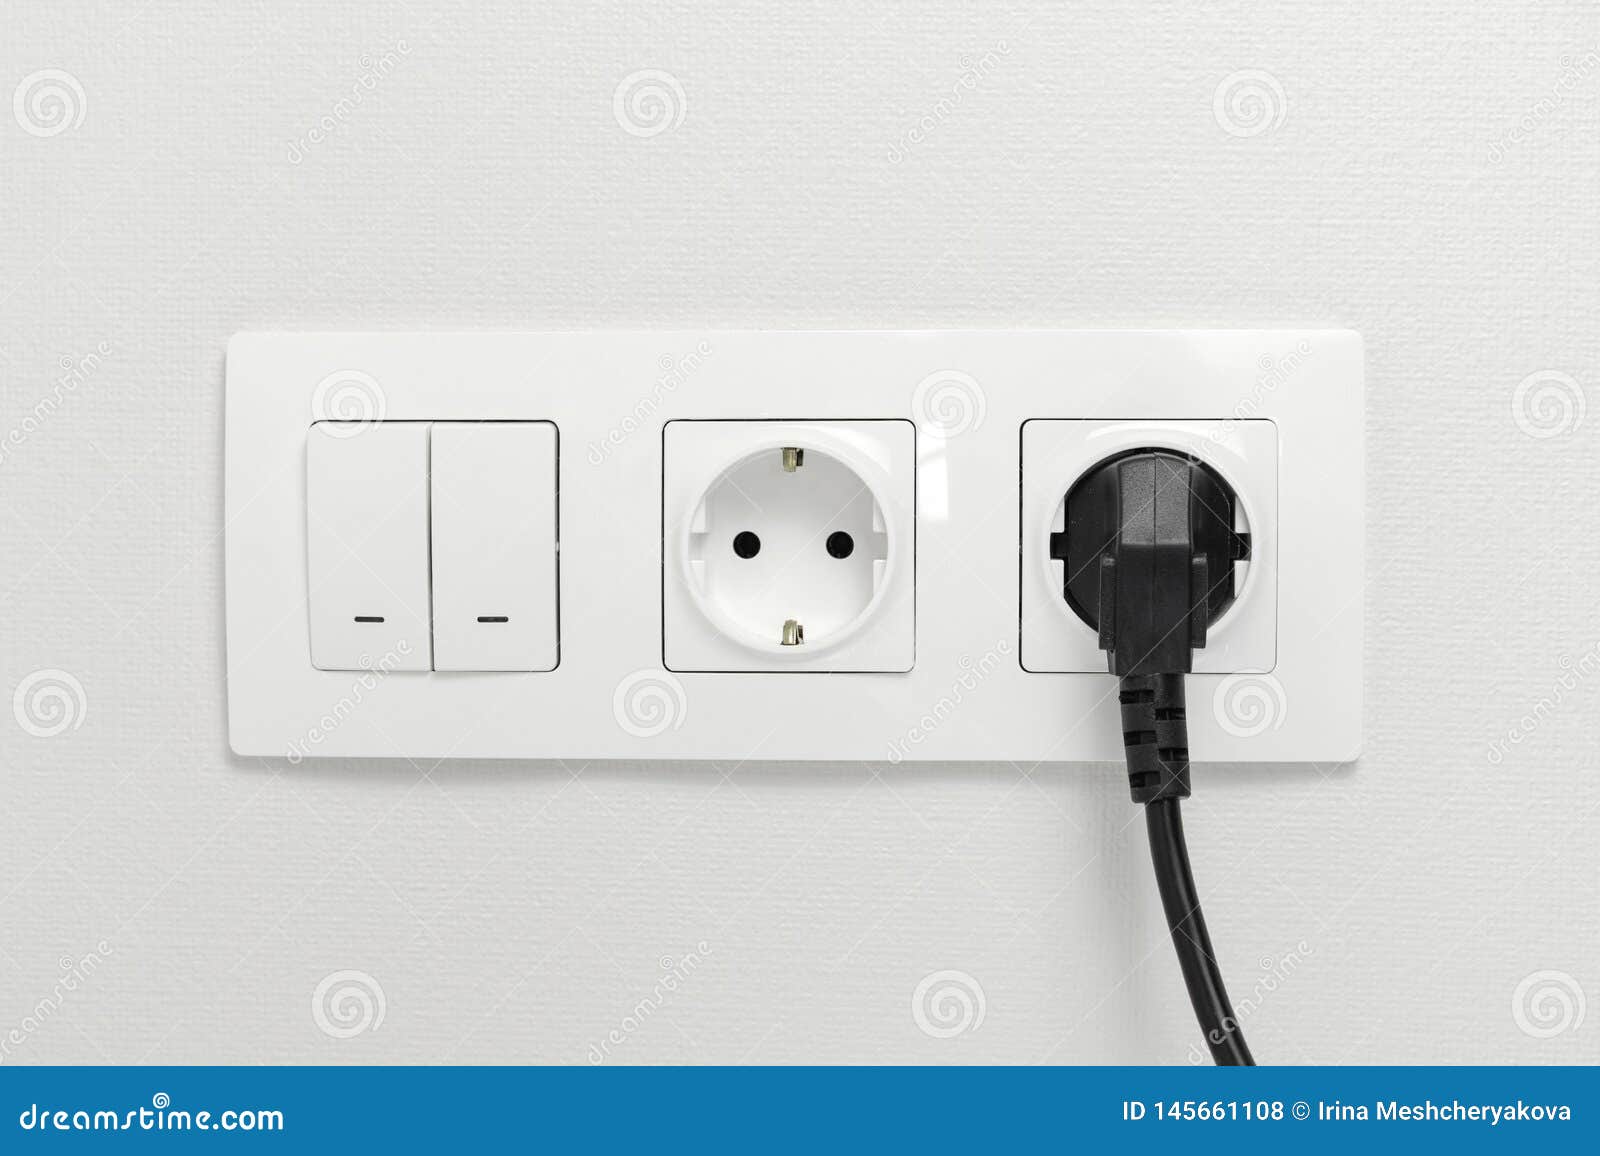 Electrical Sockets On The Wall With Black Connection Plug And White Switch Stock Photo Image